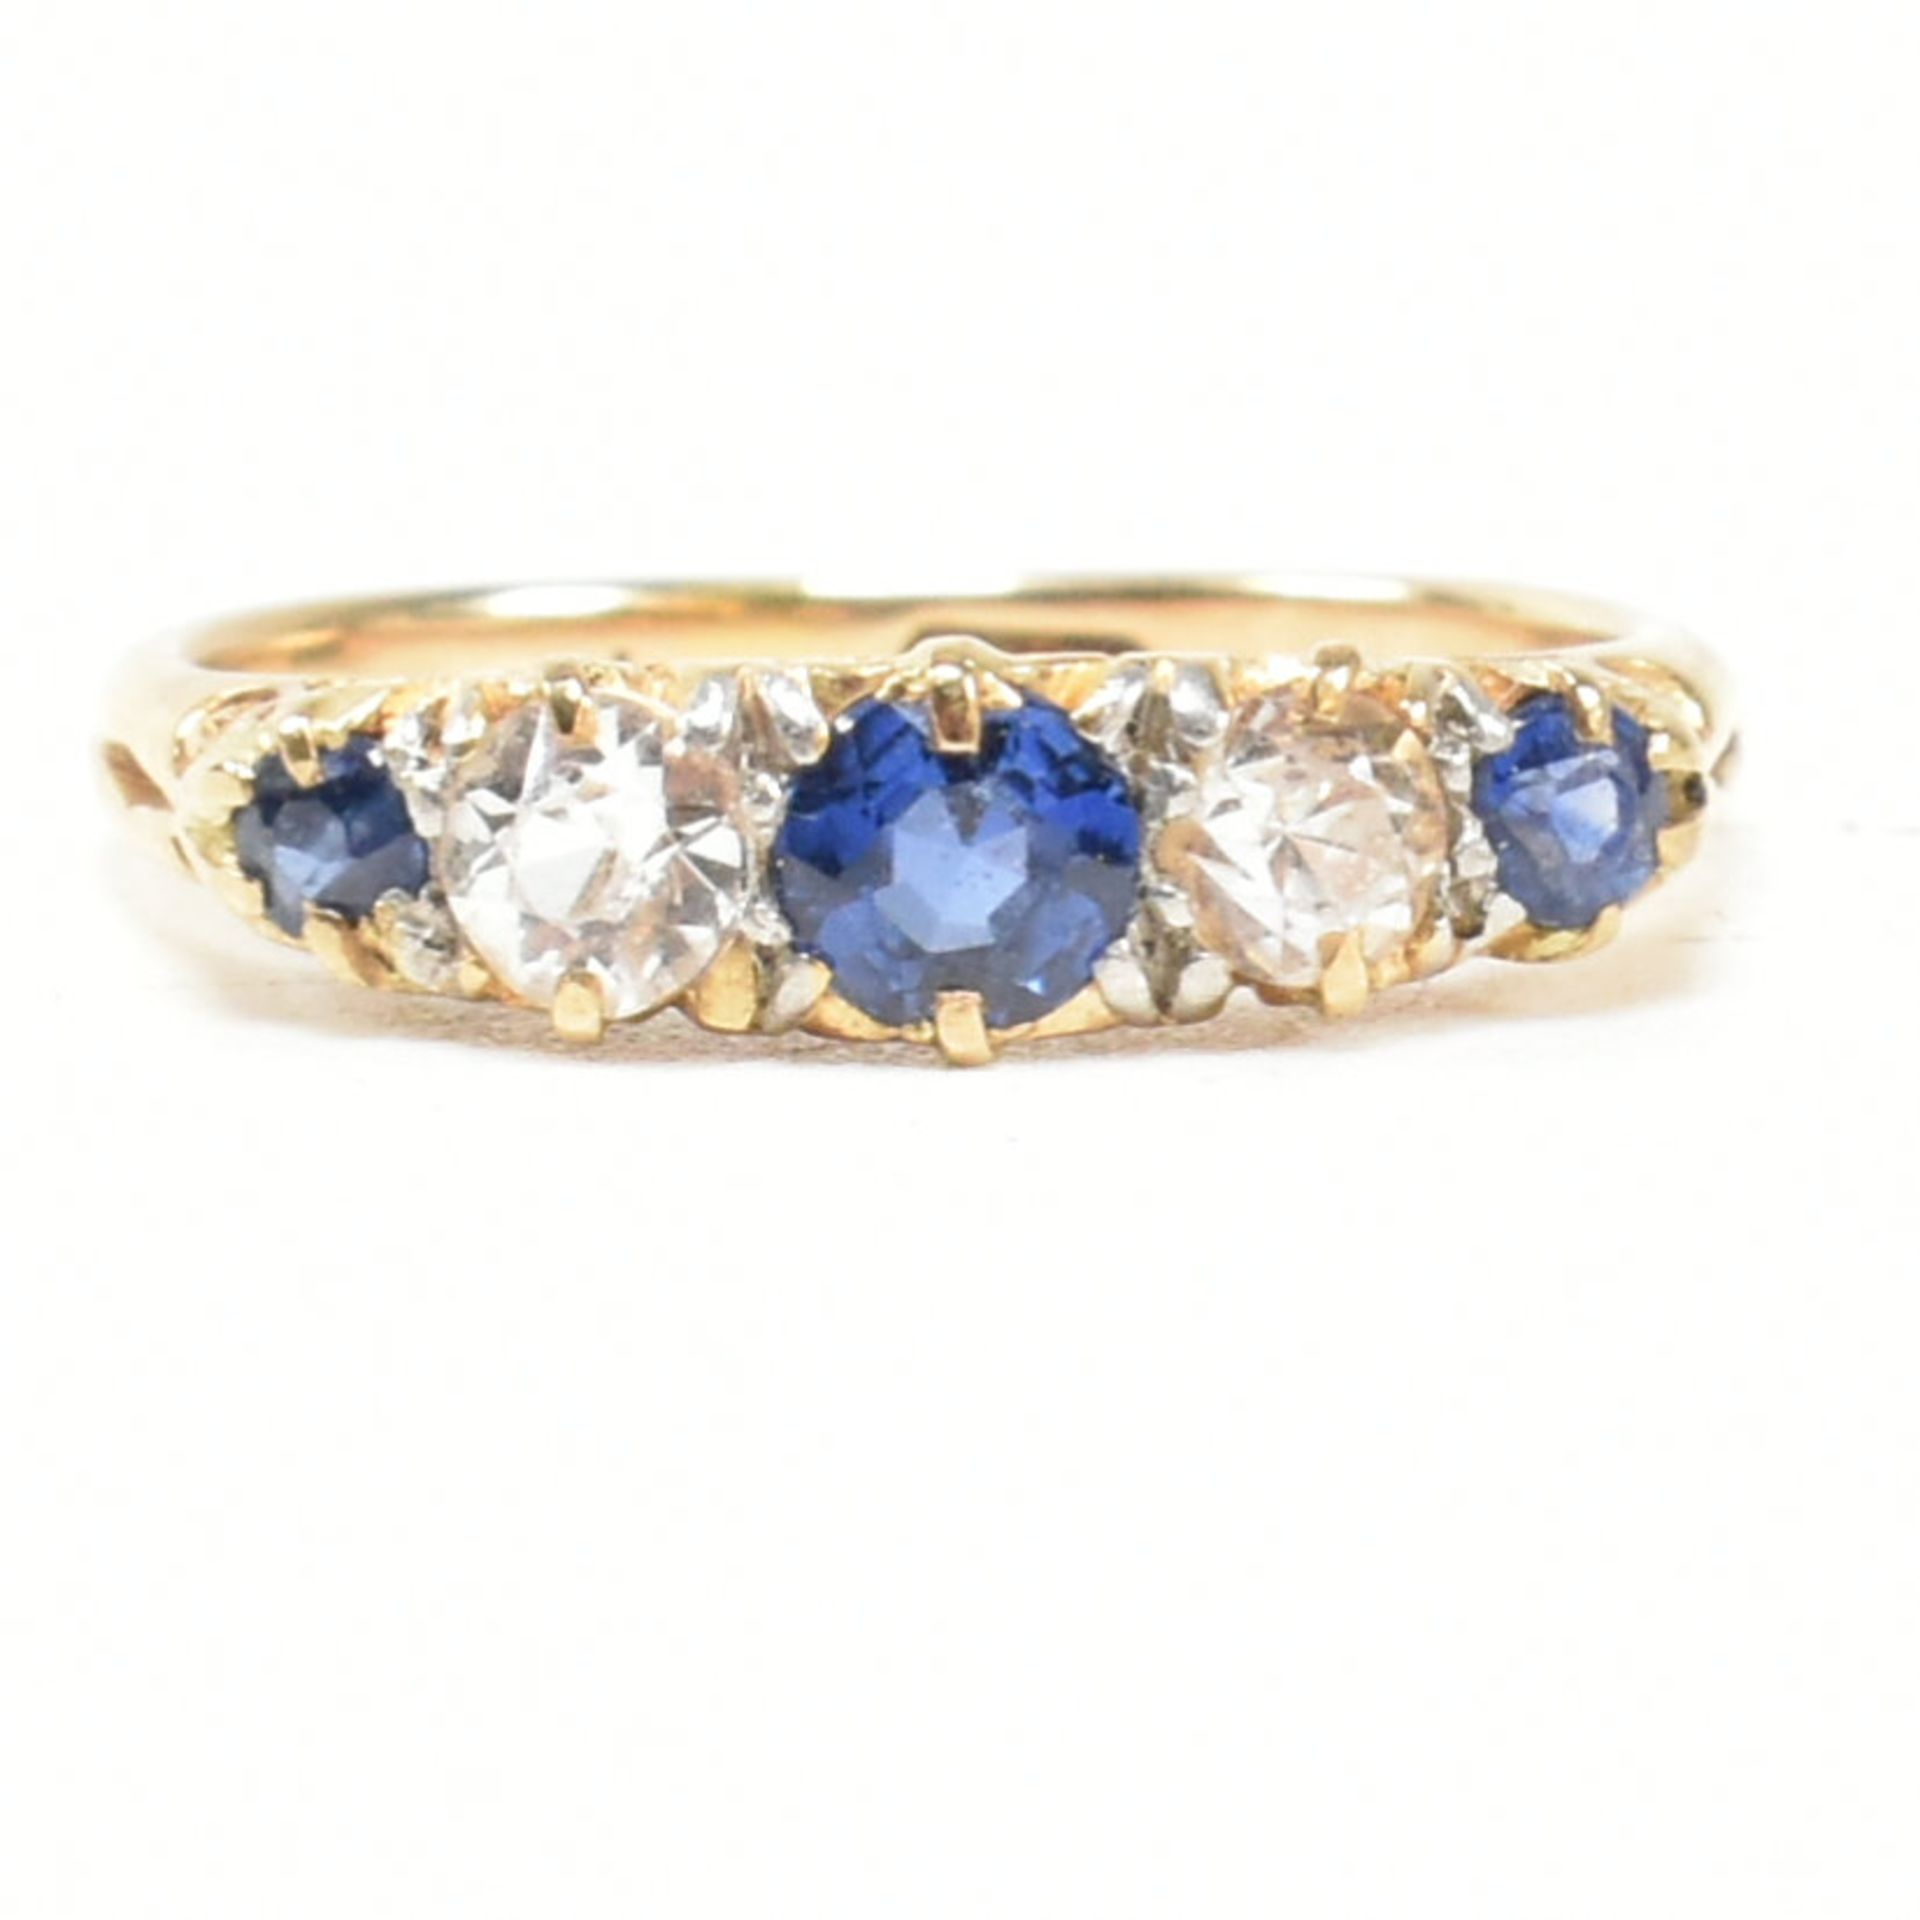 18CT GOLD & SAPPHIRE GYPSY RING